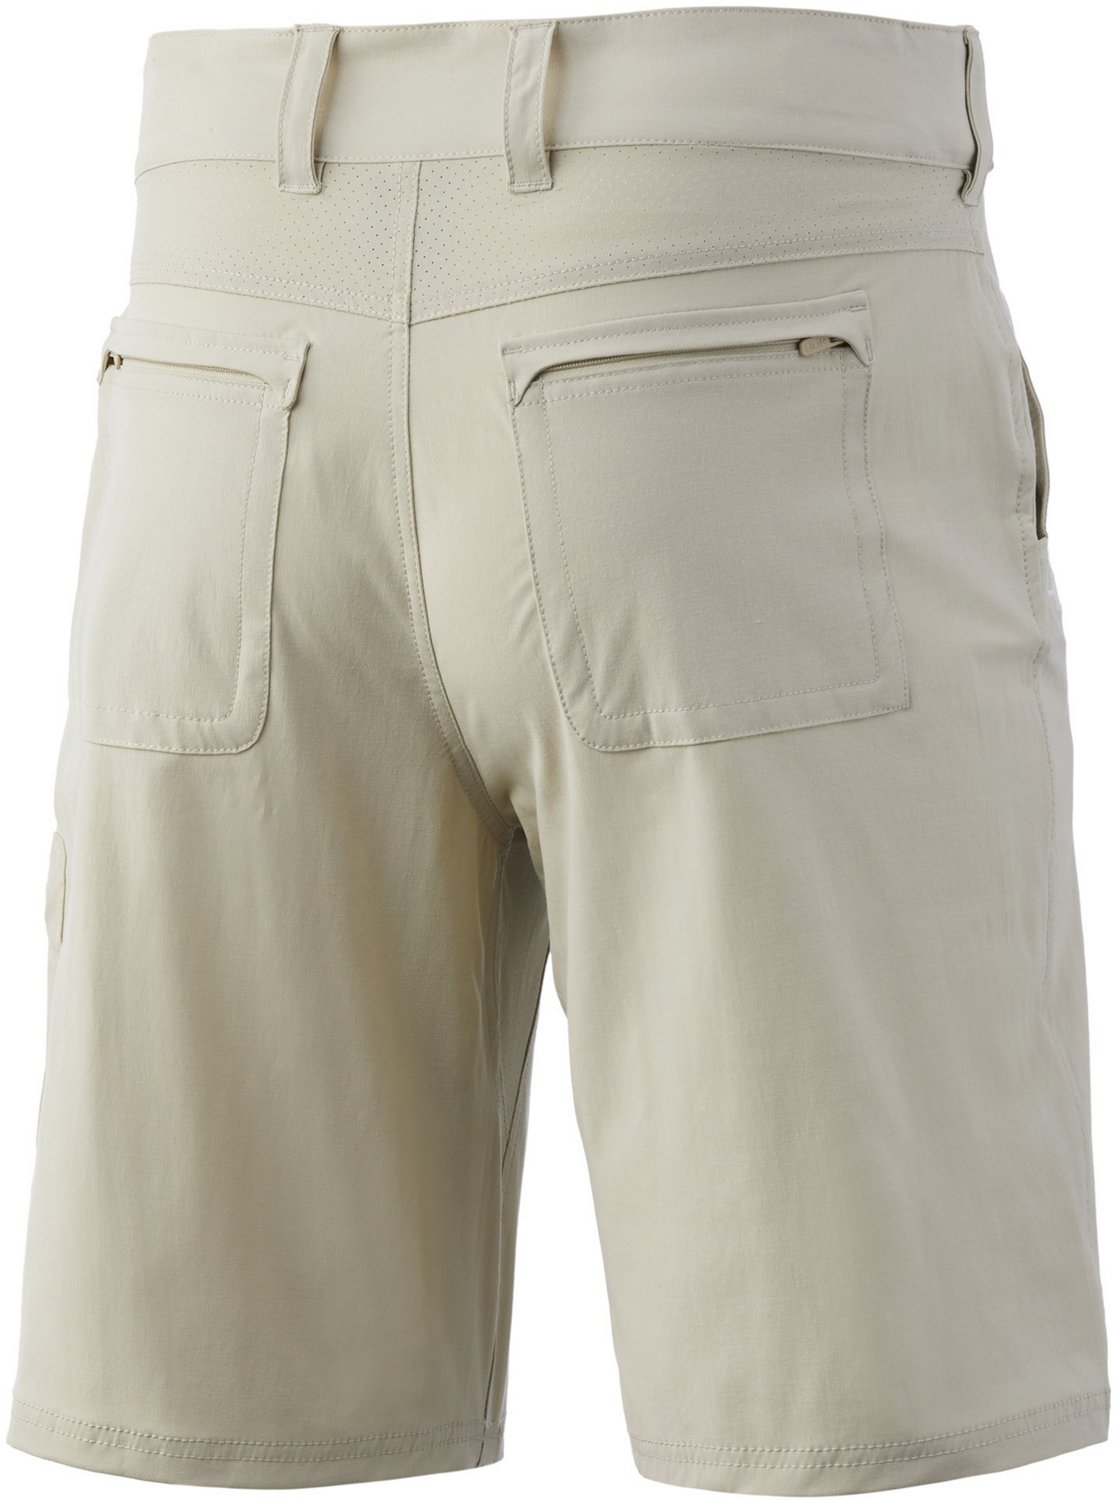 Huk Next Level Shorts - Best Quality Online At Low Prices - Melton